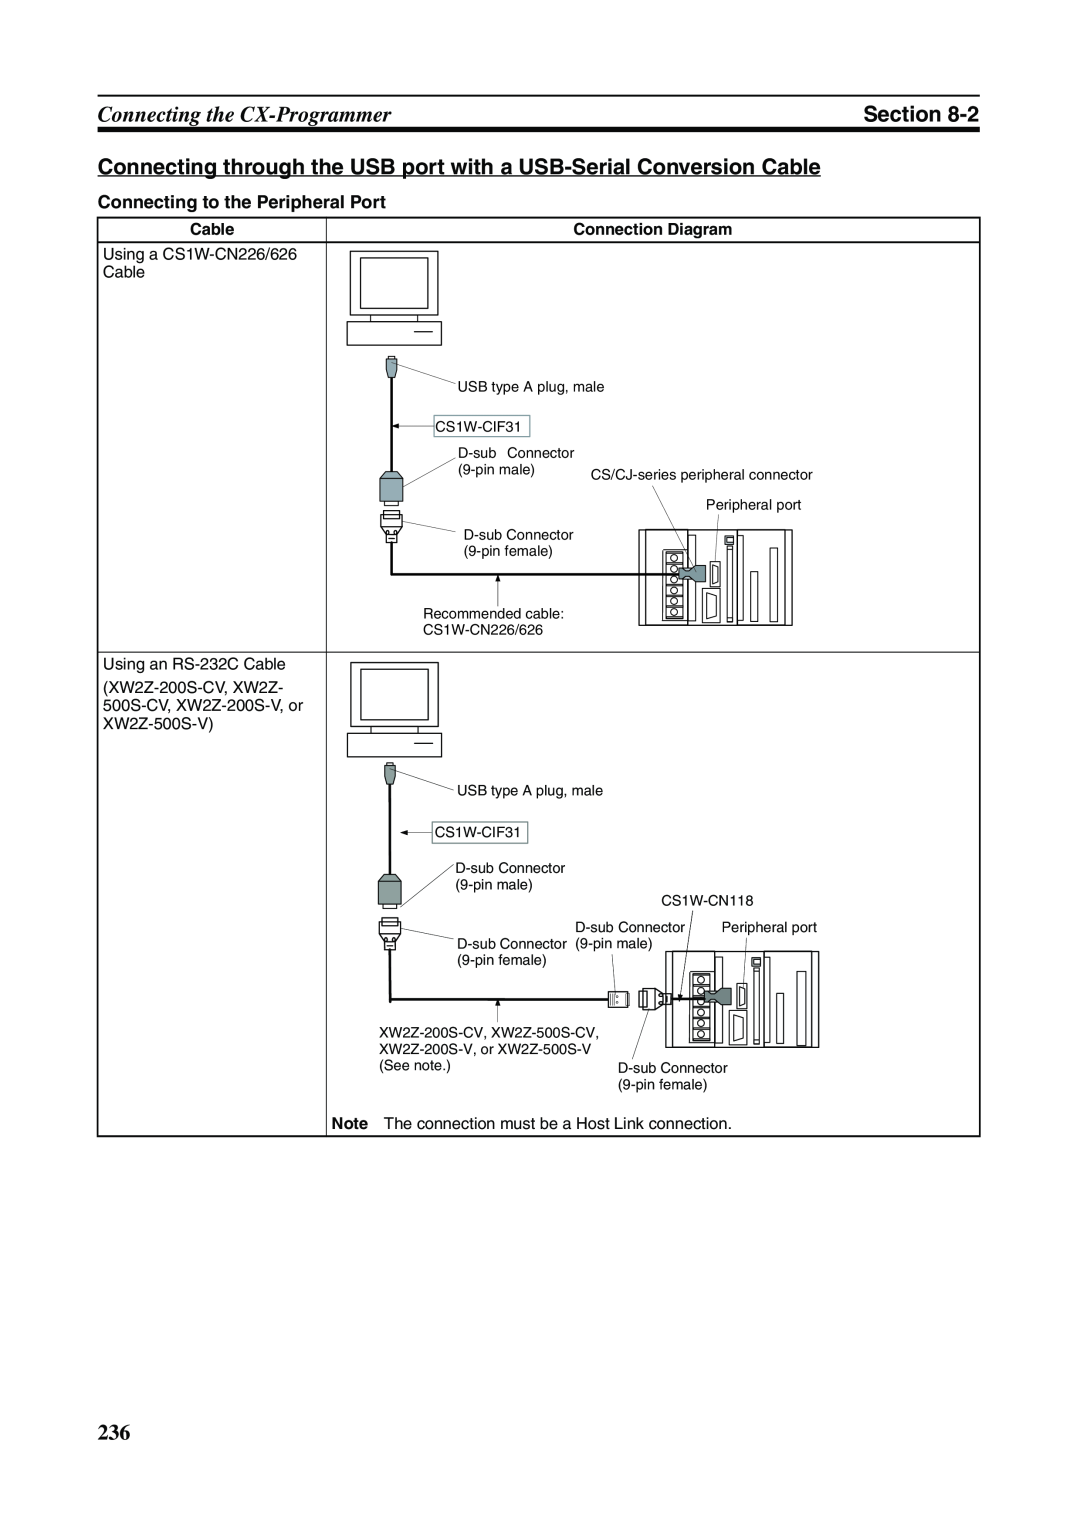 Omron FQM1-MMA21 Connecting the CX-Programmer, Section, Connecting to the Peripheral Port, Cable, Connection Diagram 